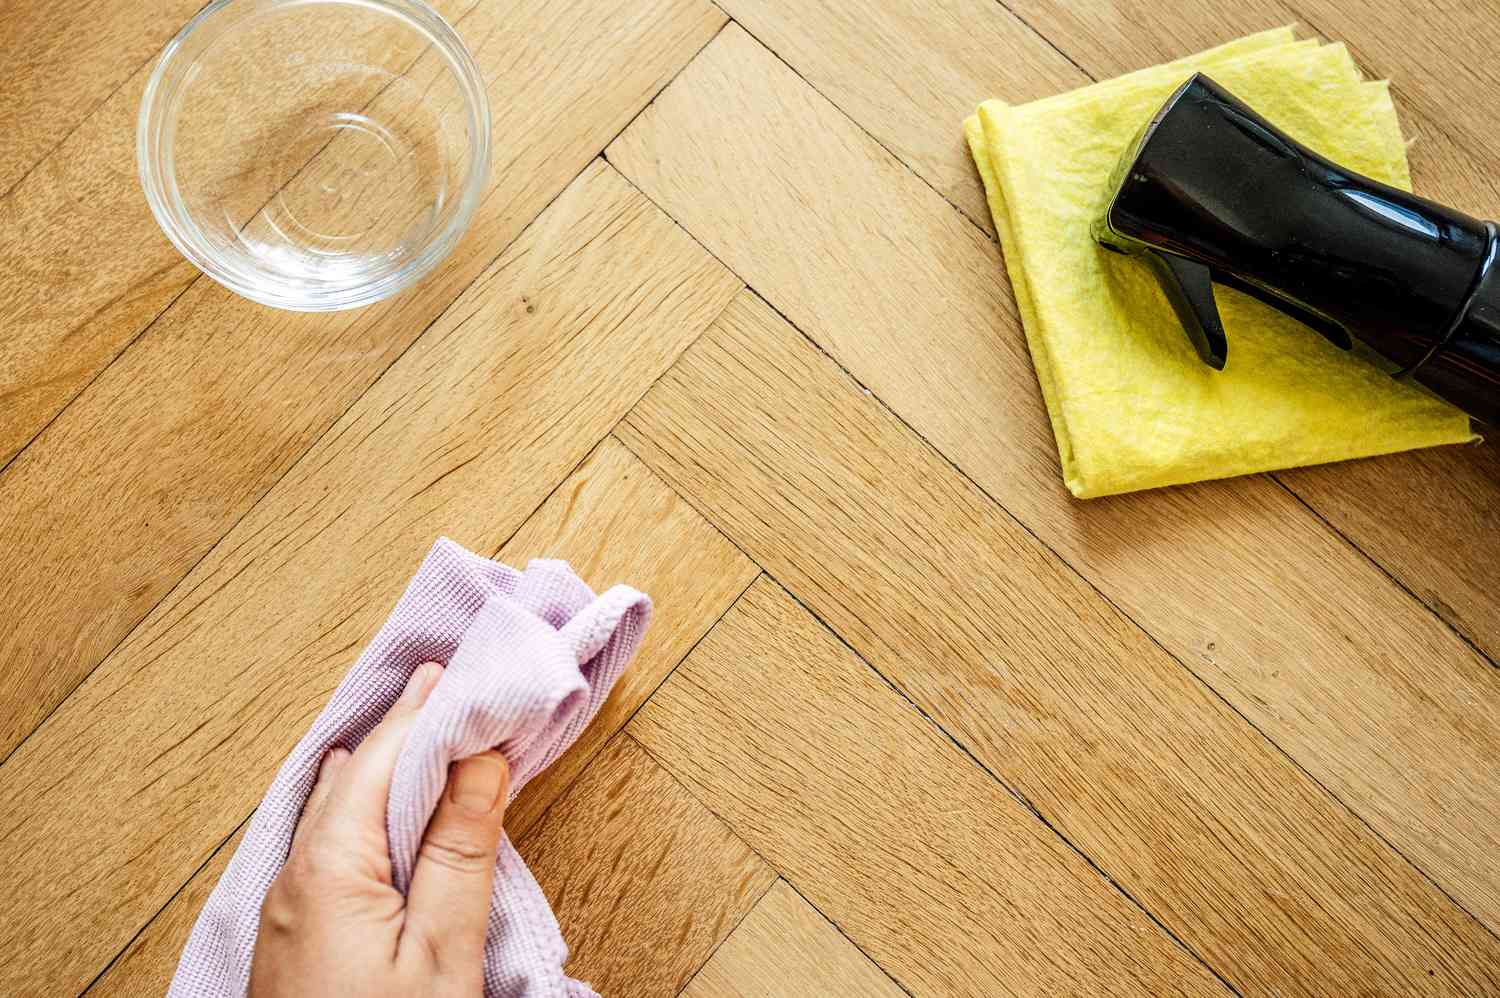 How To Get Furniture Polish Off The Floor